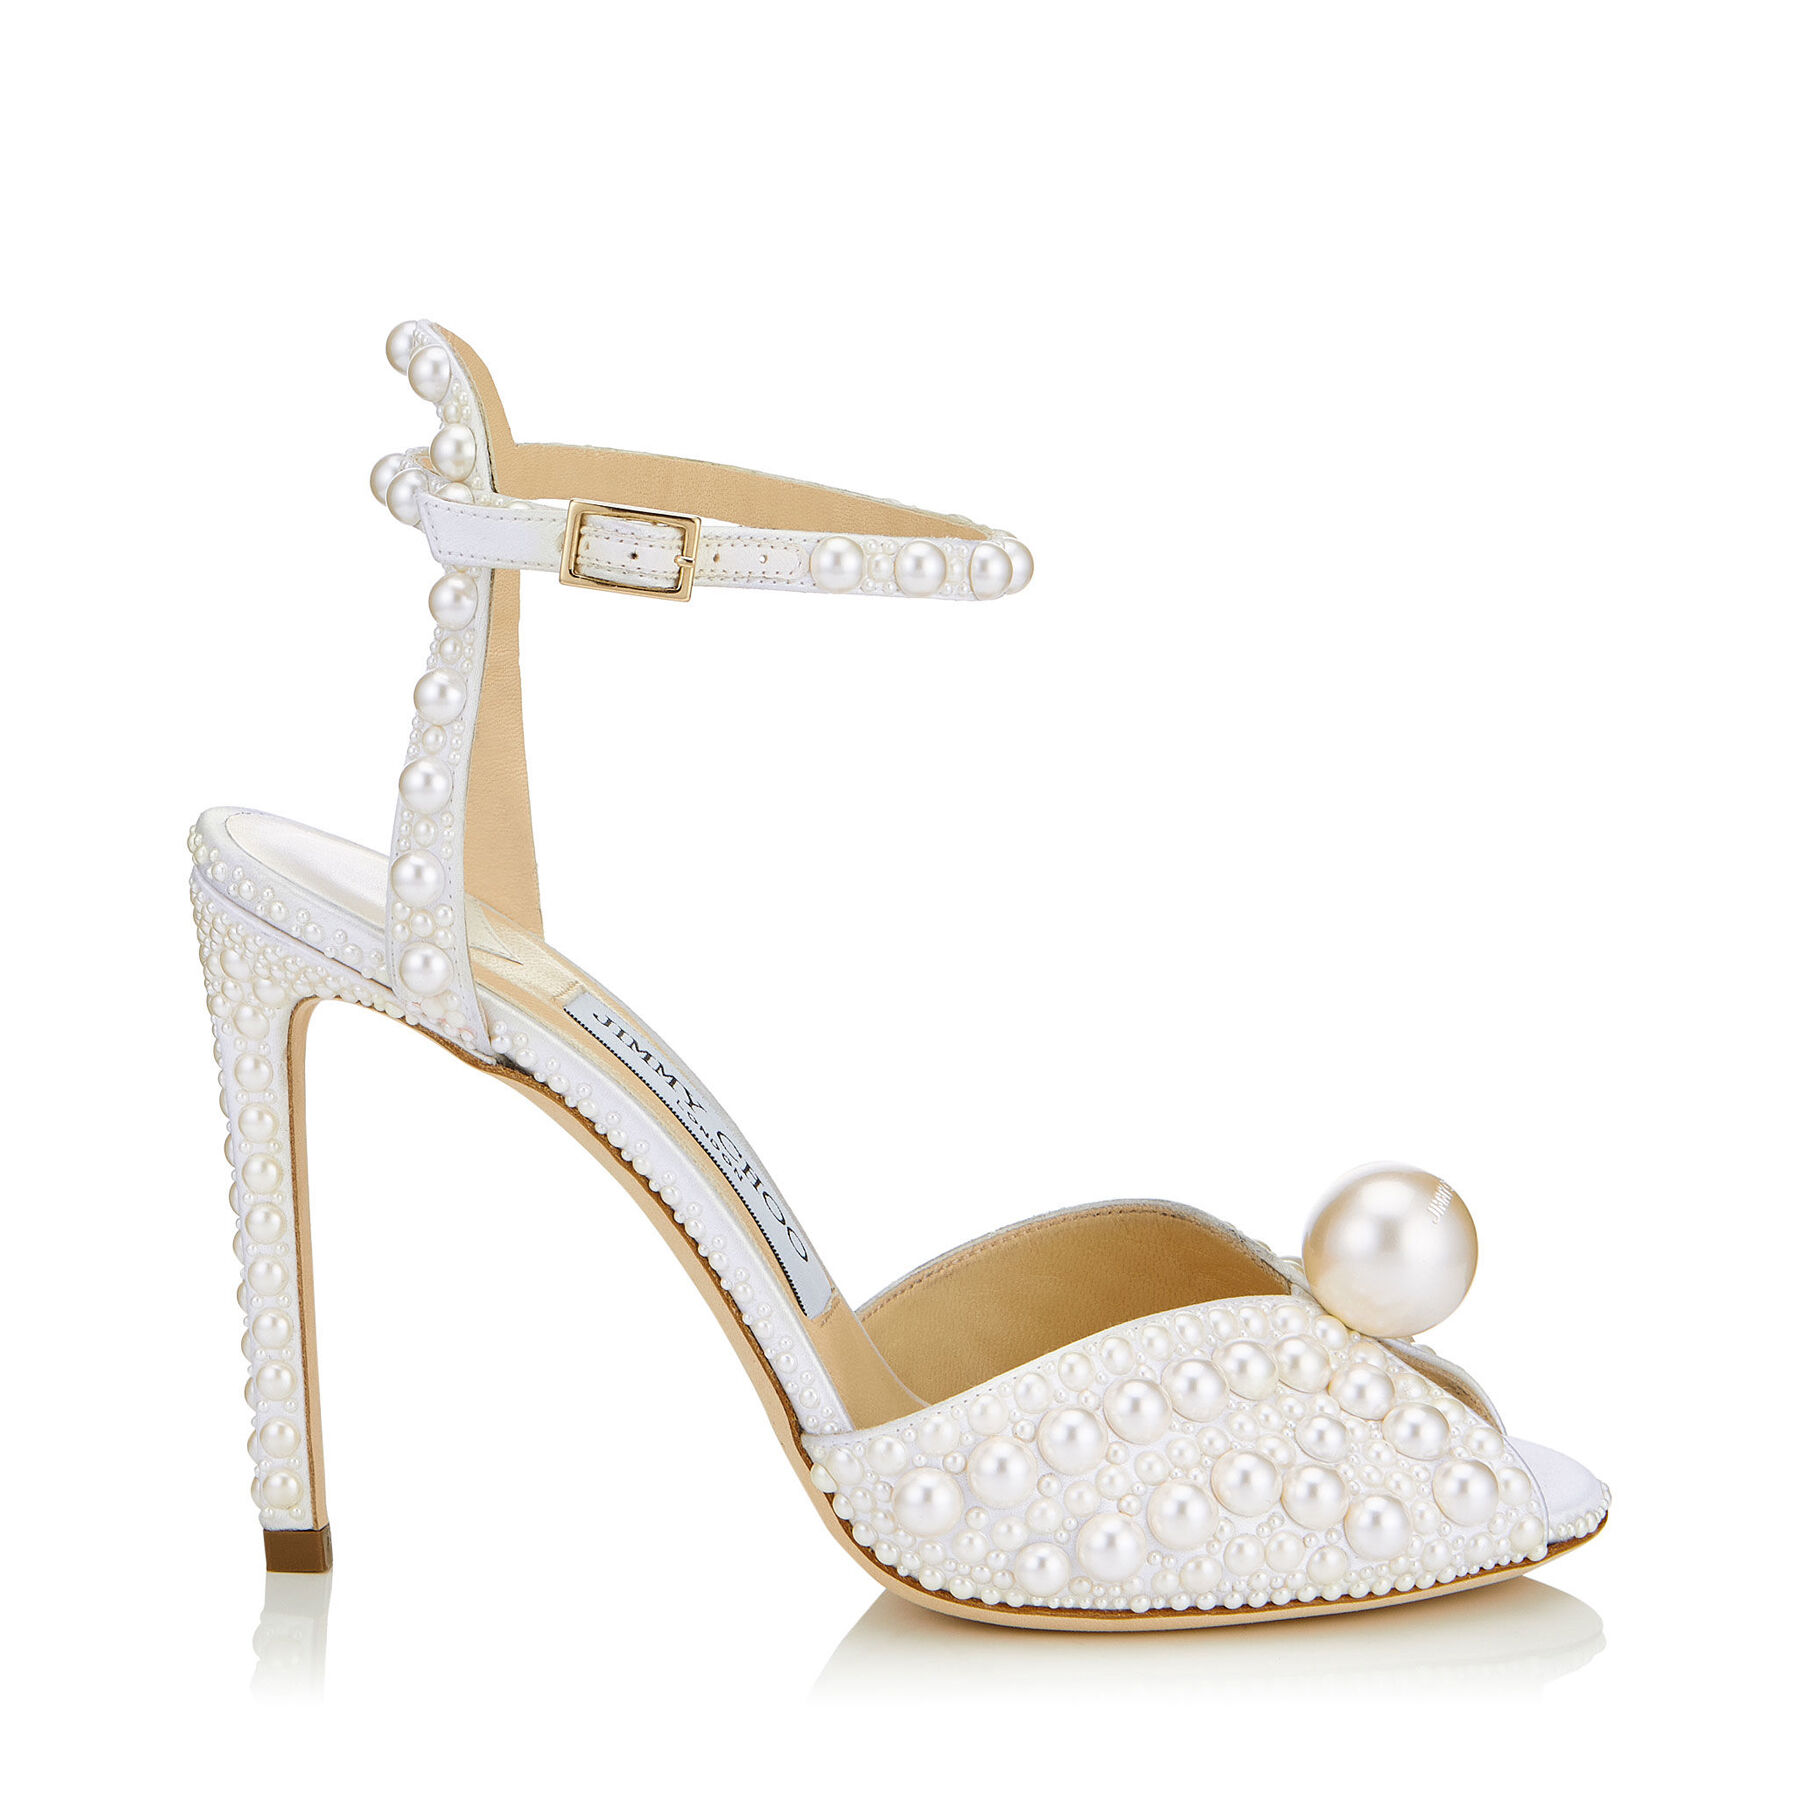 White Satin Sandals with Over Pearls SACORA 100 | Autumn 18 | JIMMY CHOO